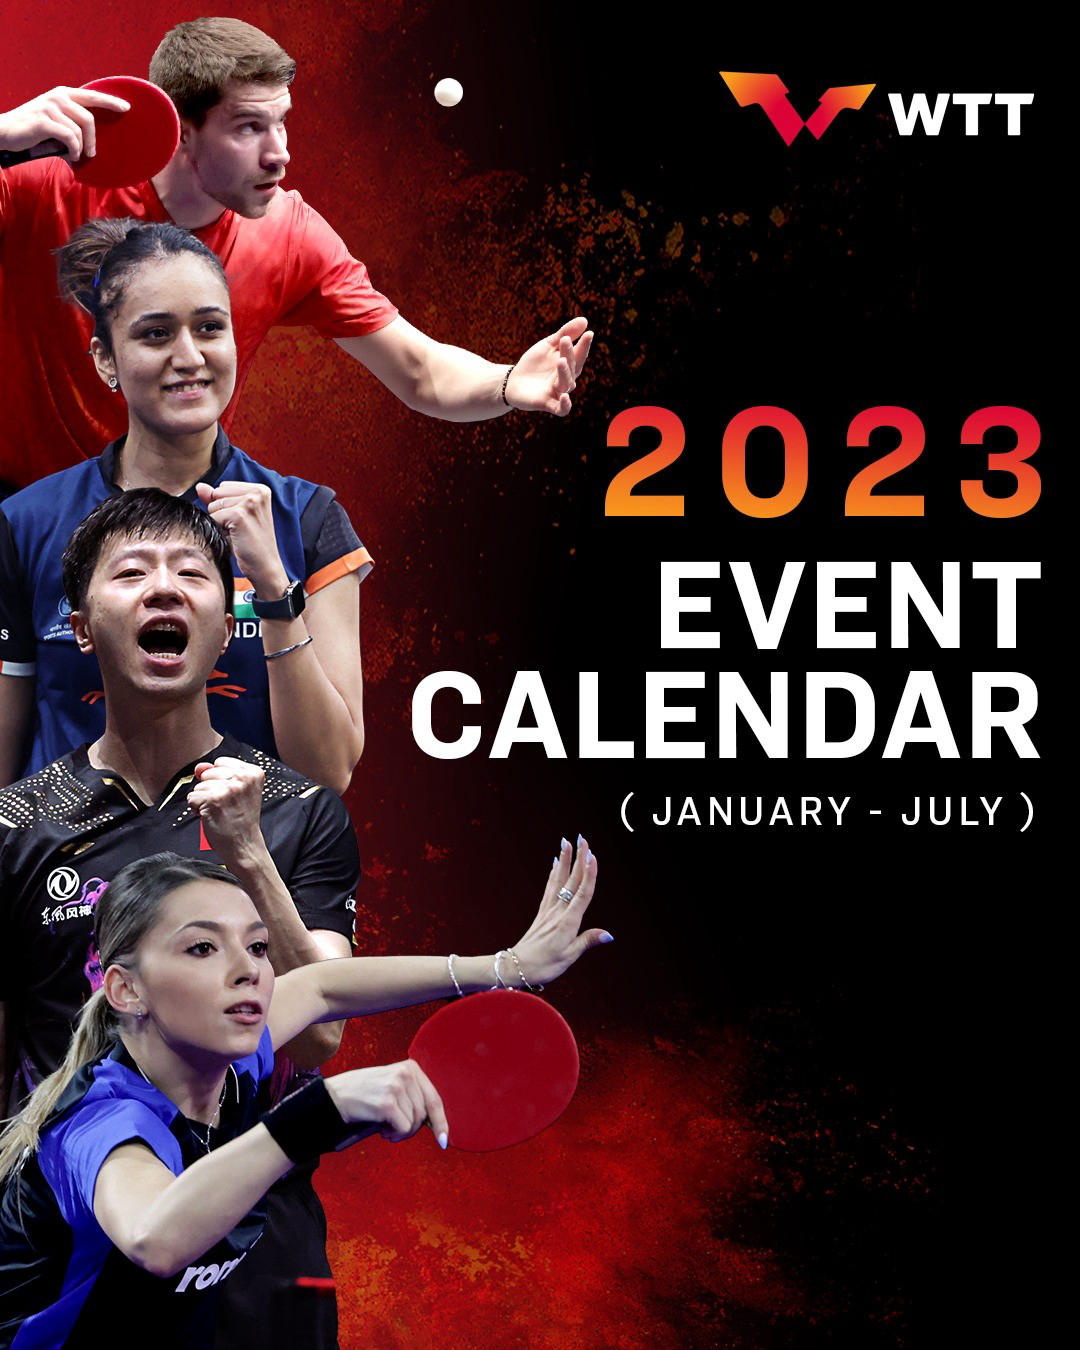 World Table Tennis - With a new year comes new events for World Table Tennis